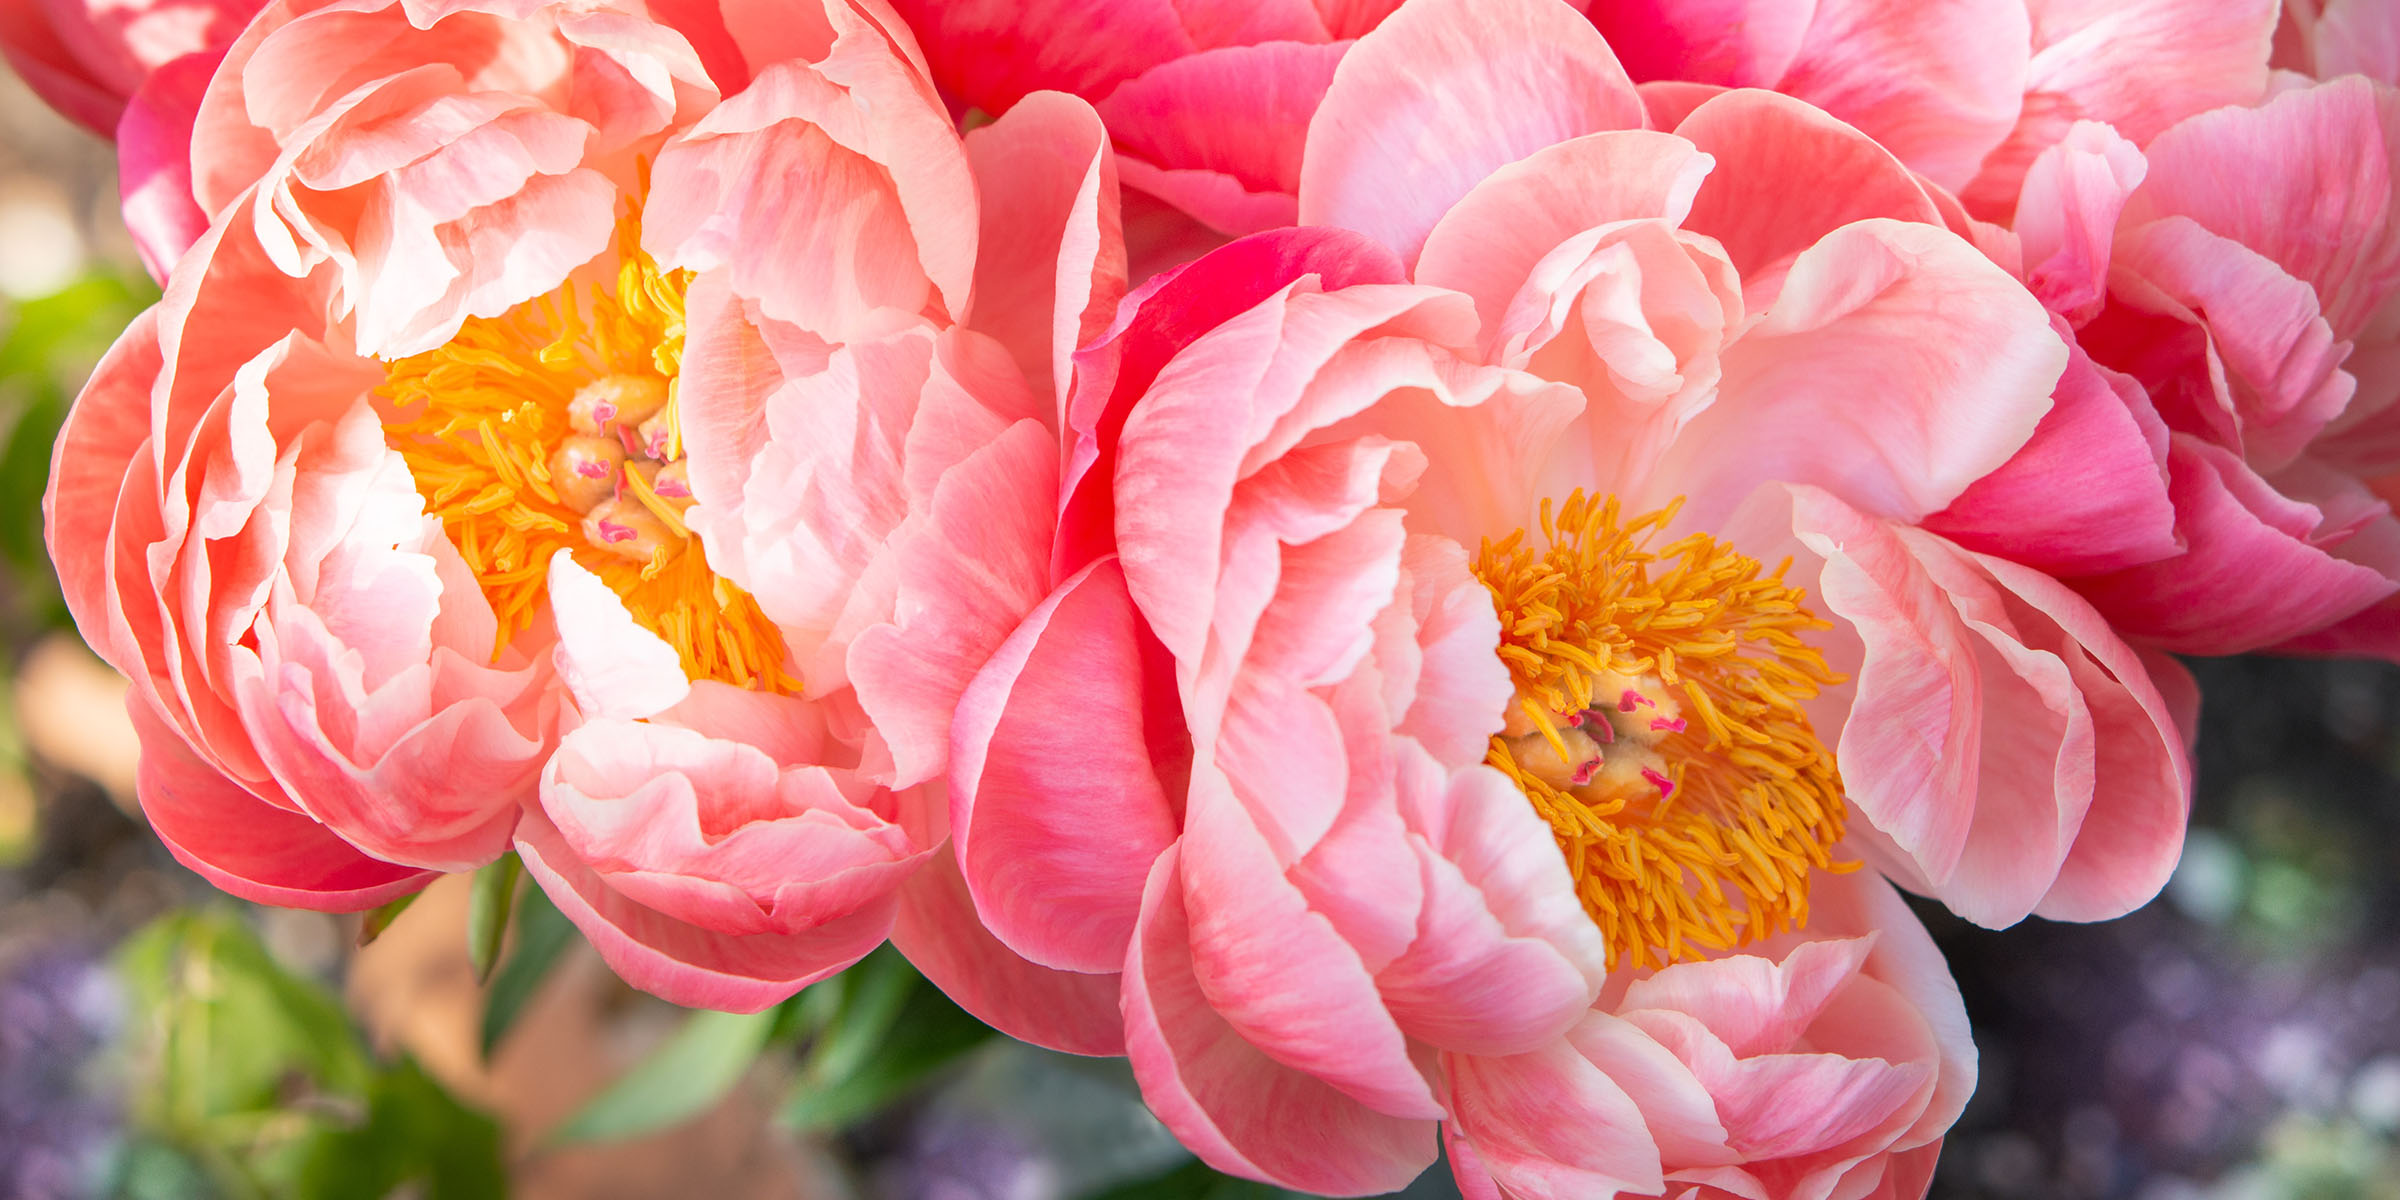 Peony is the Perfect Flower for June feature on Thursd